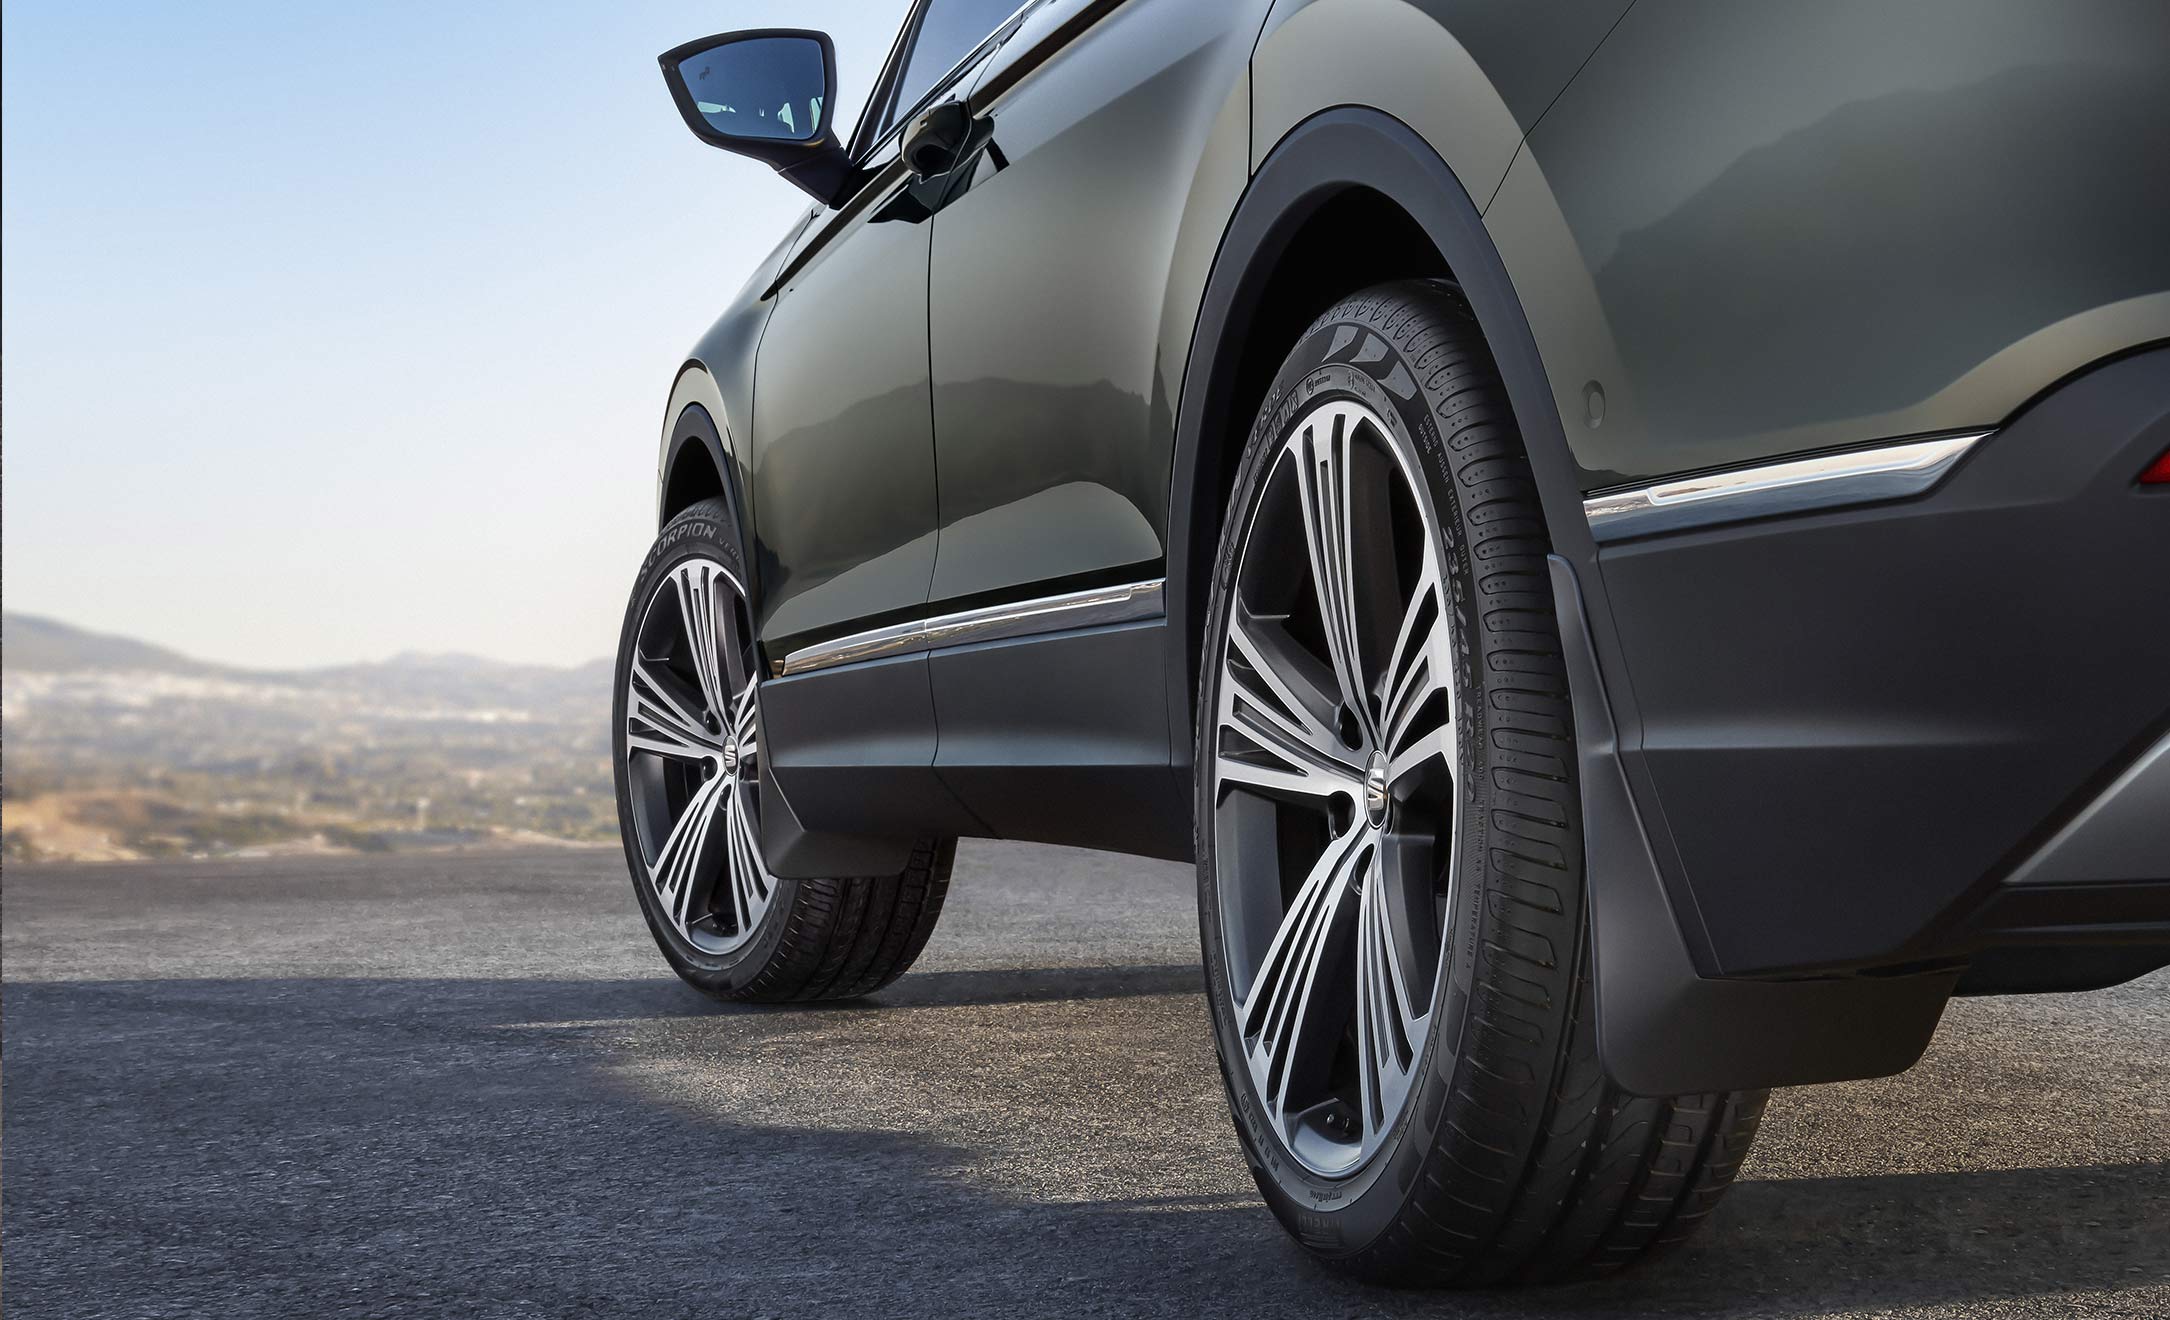 SEAT Tarraco safety feature will automatically call emergency services if an accident occurs